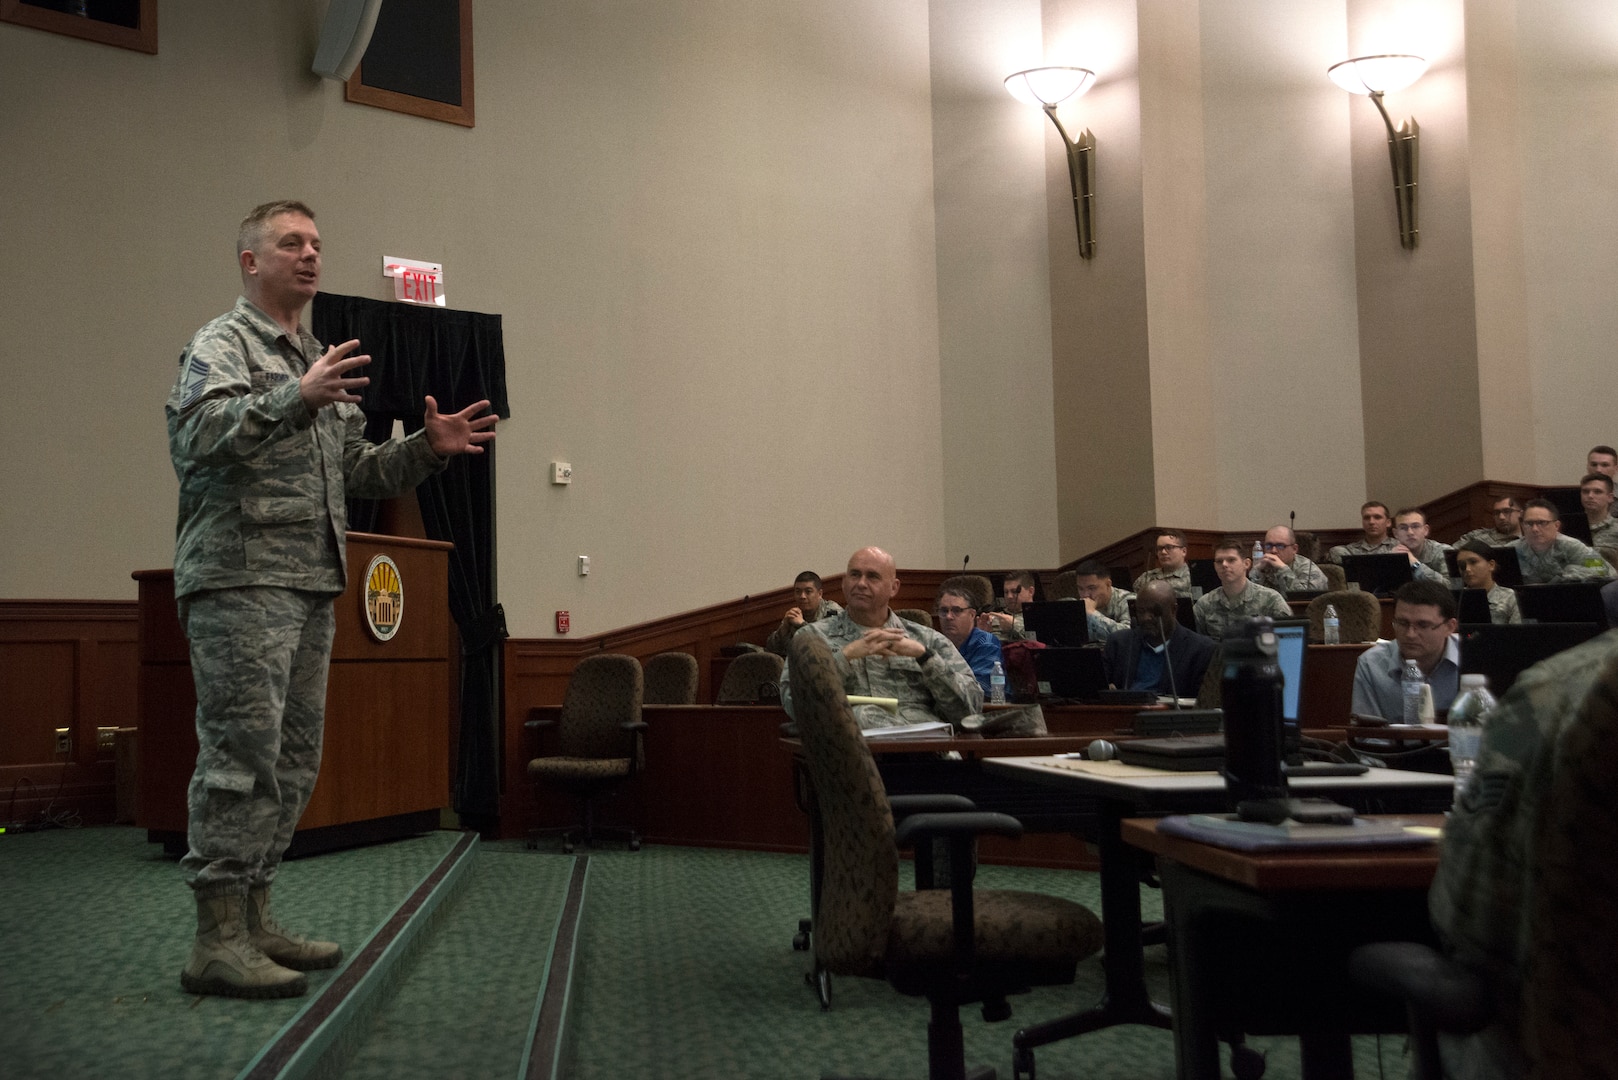 Chief Master Sergeant James Farmer, 690th Cyberspace Operations Group superintendent, answers questions during the Cybersecurity Foundry Course at MacDill Air Force Base, Fla., March 14, 2018. Course instructors taught 100 cyberspace students various cybersecurity functions, processes, procedures and data analysis skills to further their ability to secure the Air Force Network. (U.S. Air Force photo by Airman 1st Class Scott Warner)